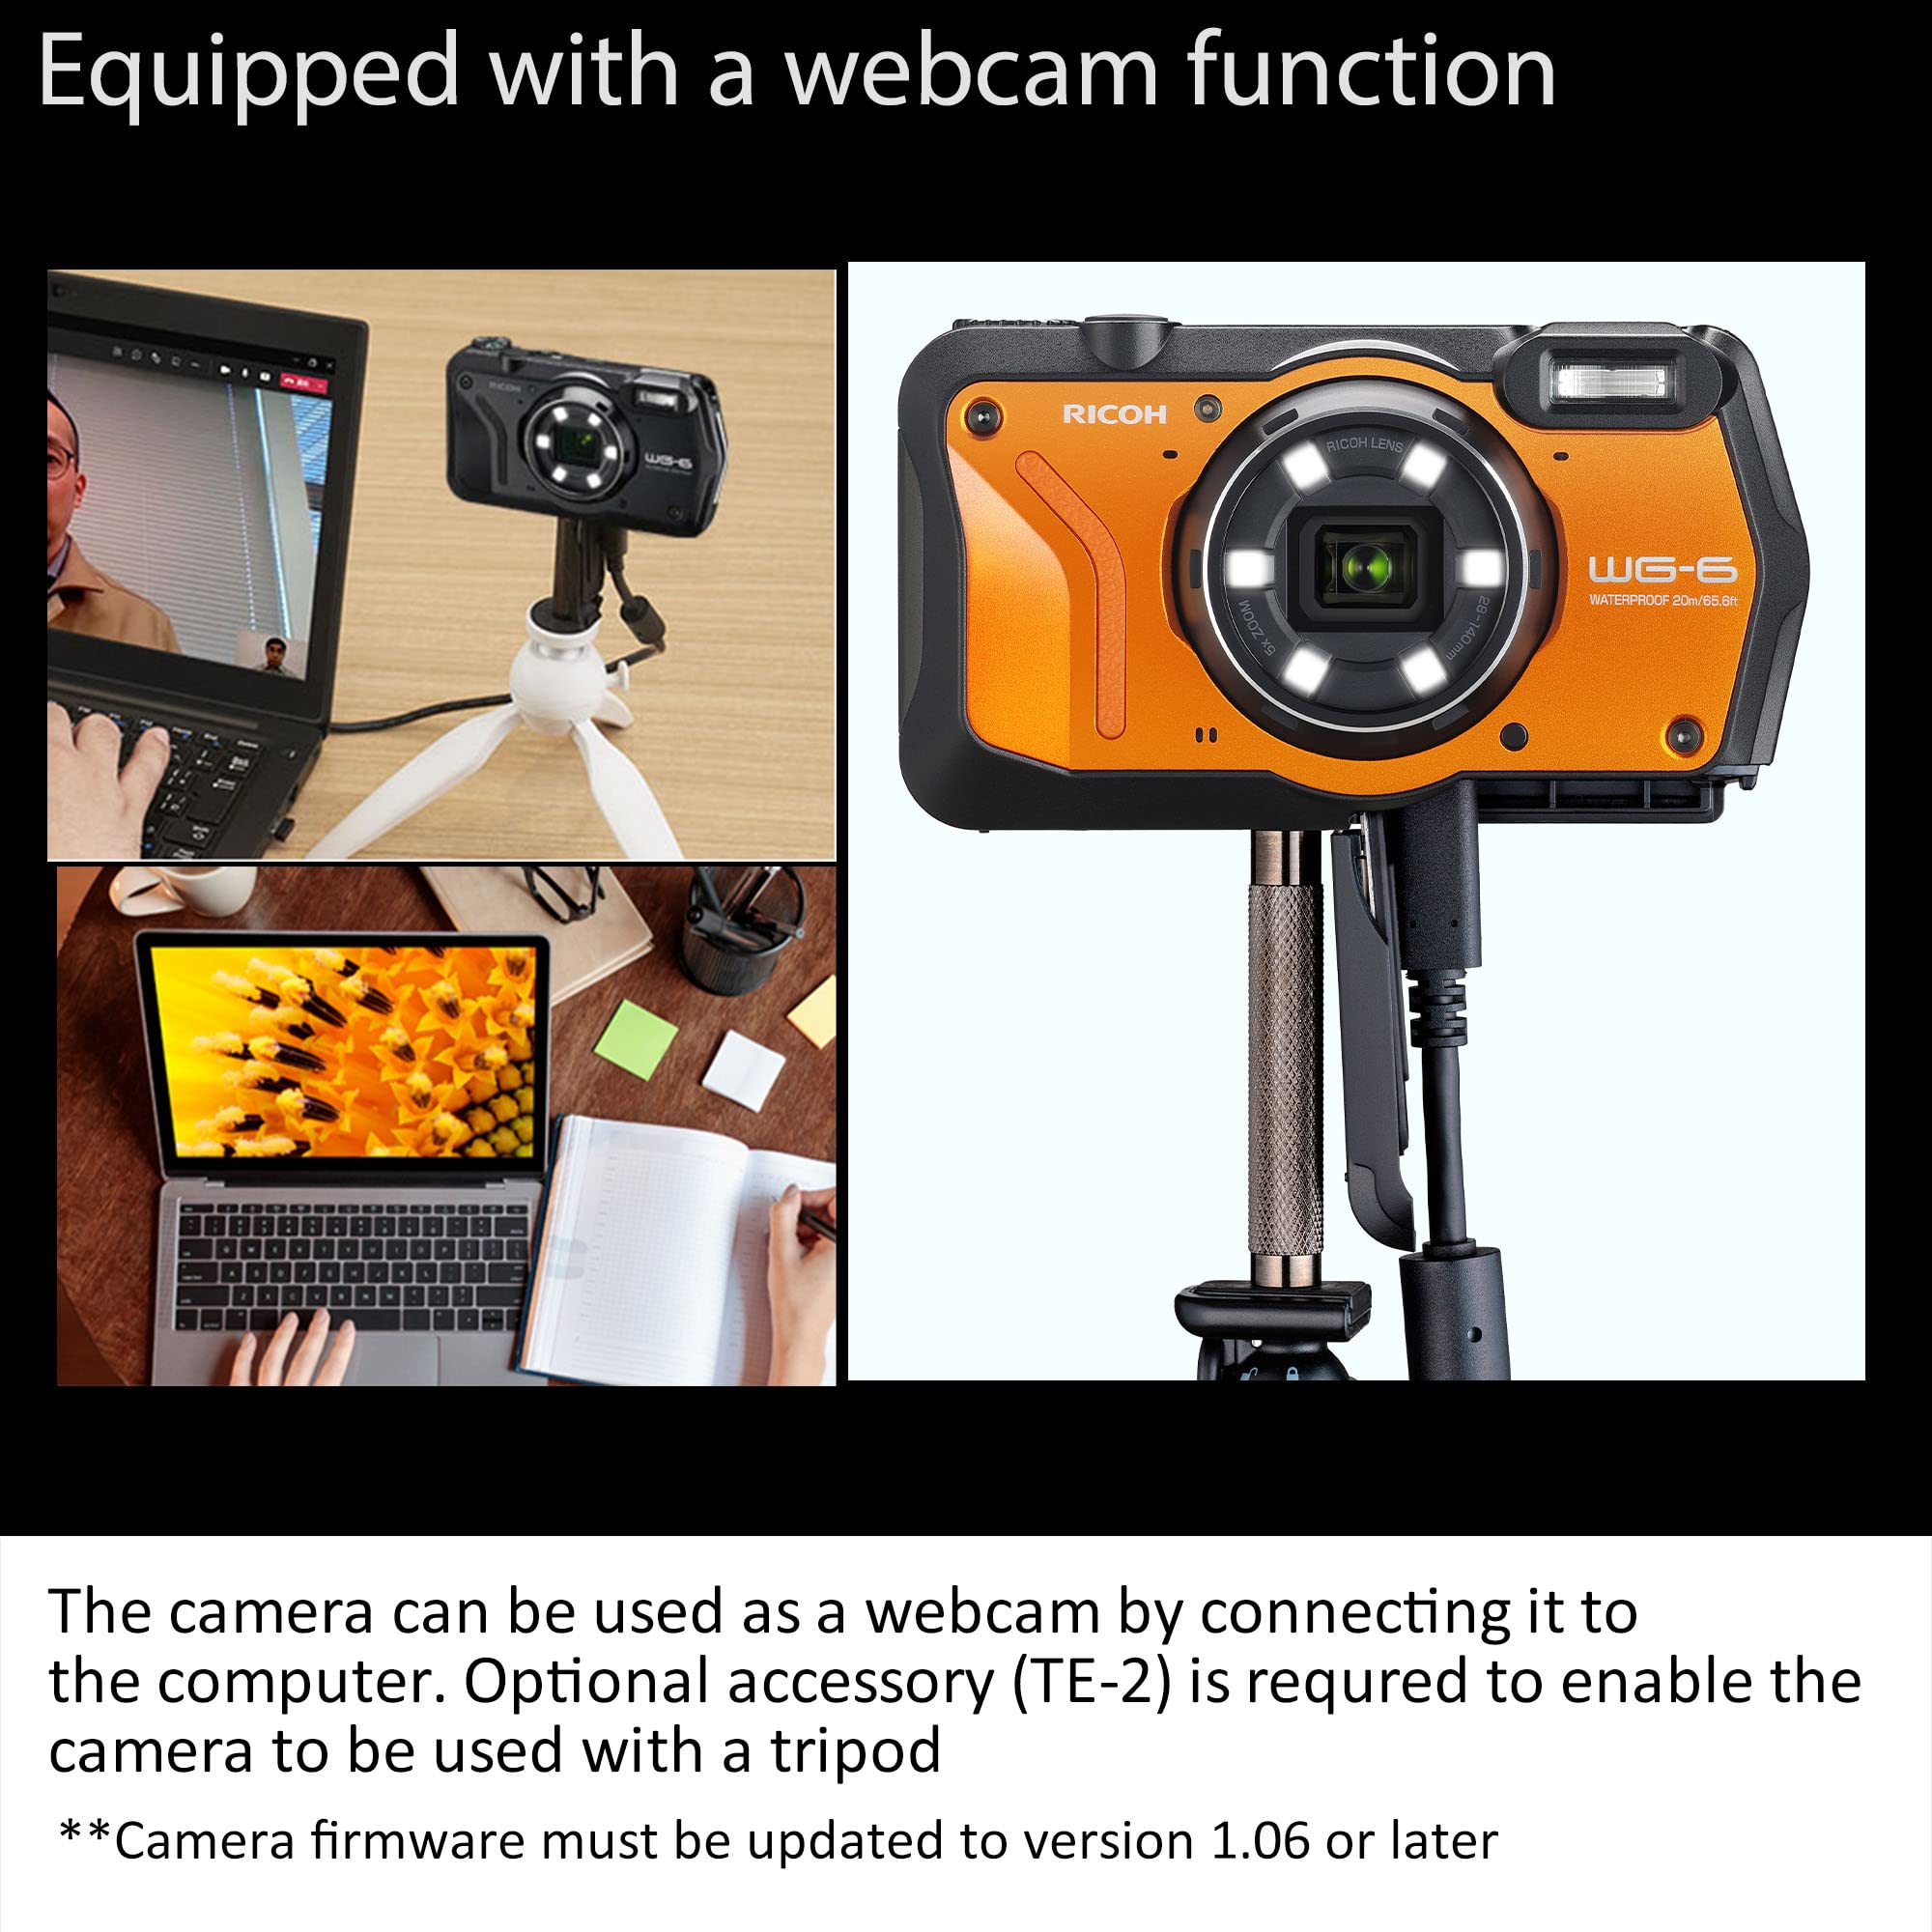 Ricoh WG-6 Webcam Orange Waterproof Camera 20MP Higher Resolution Images 3-Inch LCD Waterproof 20m Shockproof 2.1m Underwater Mode 6-LED Ring Light for Macro Photography